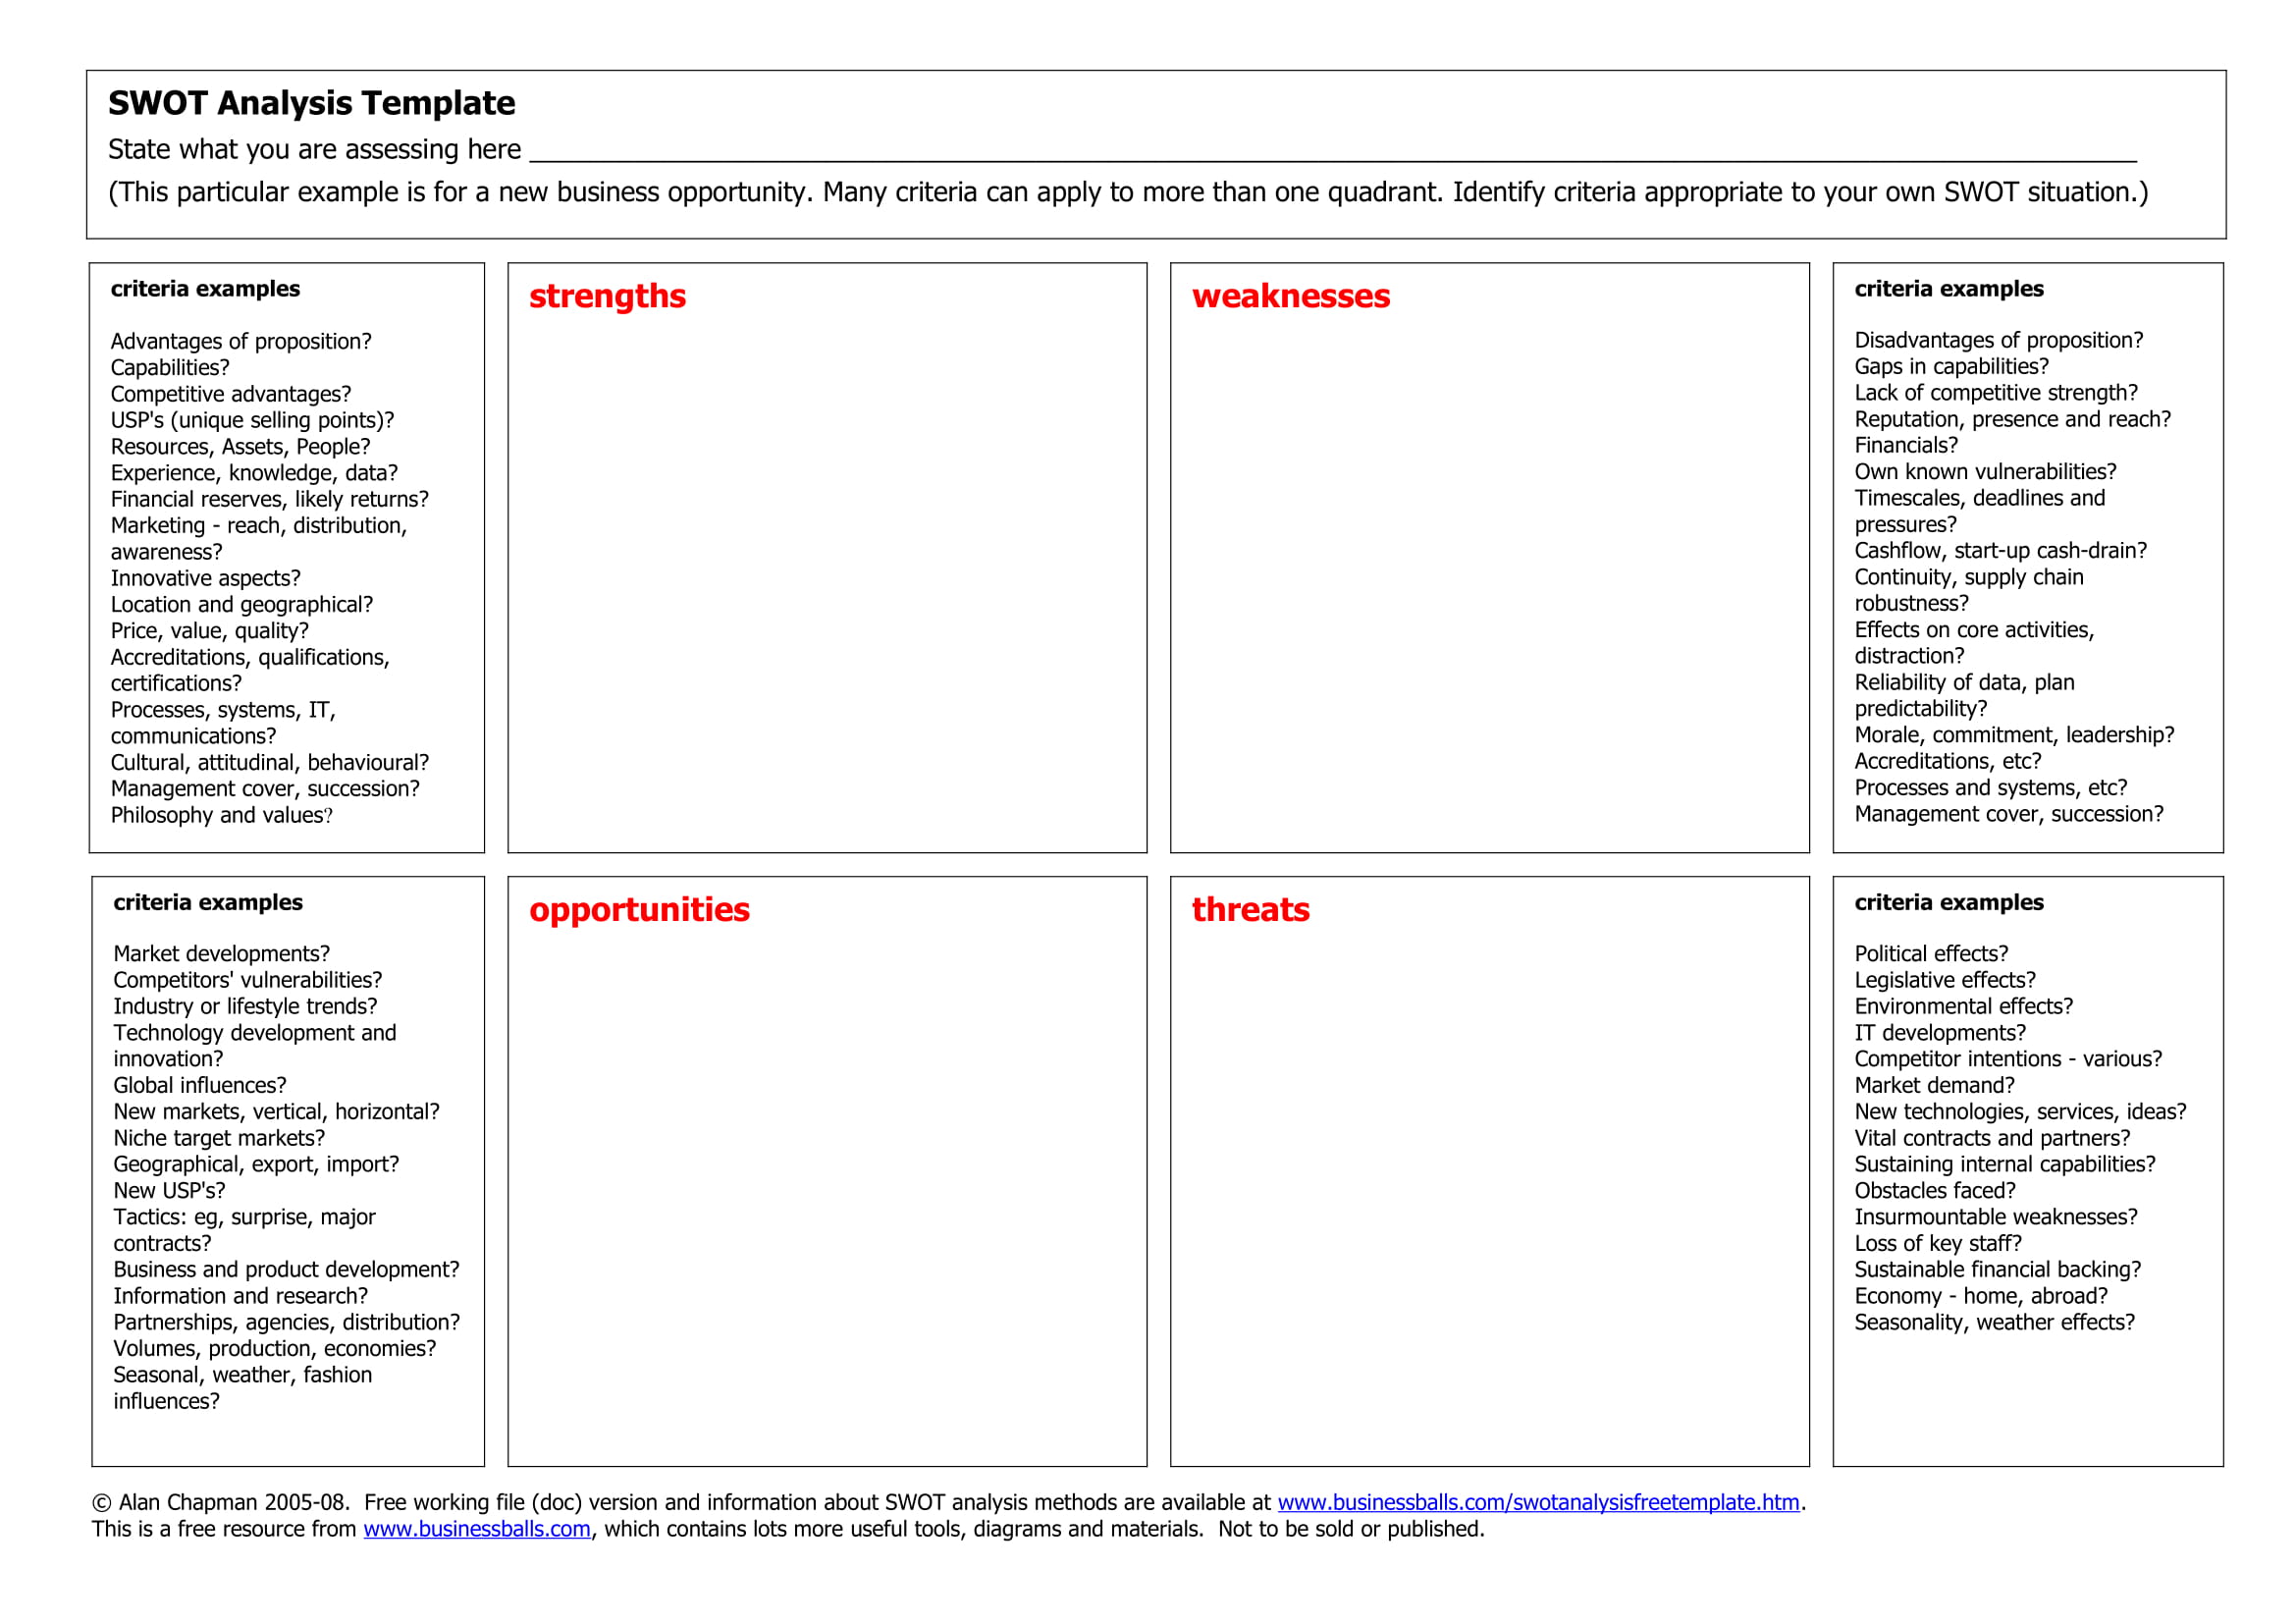 Strengths And Weaknesses Chart Template